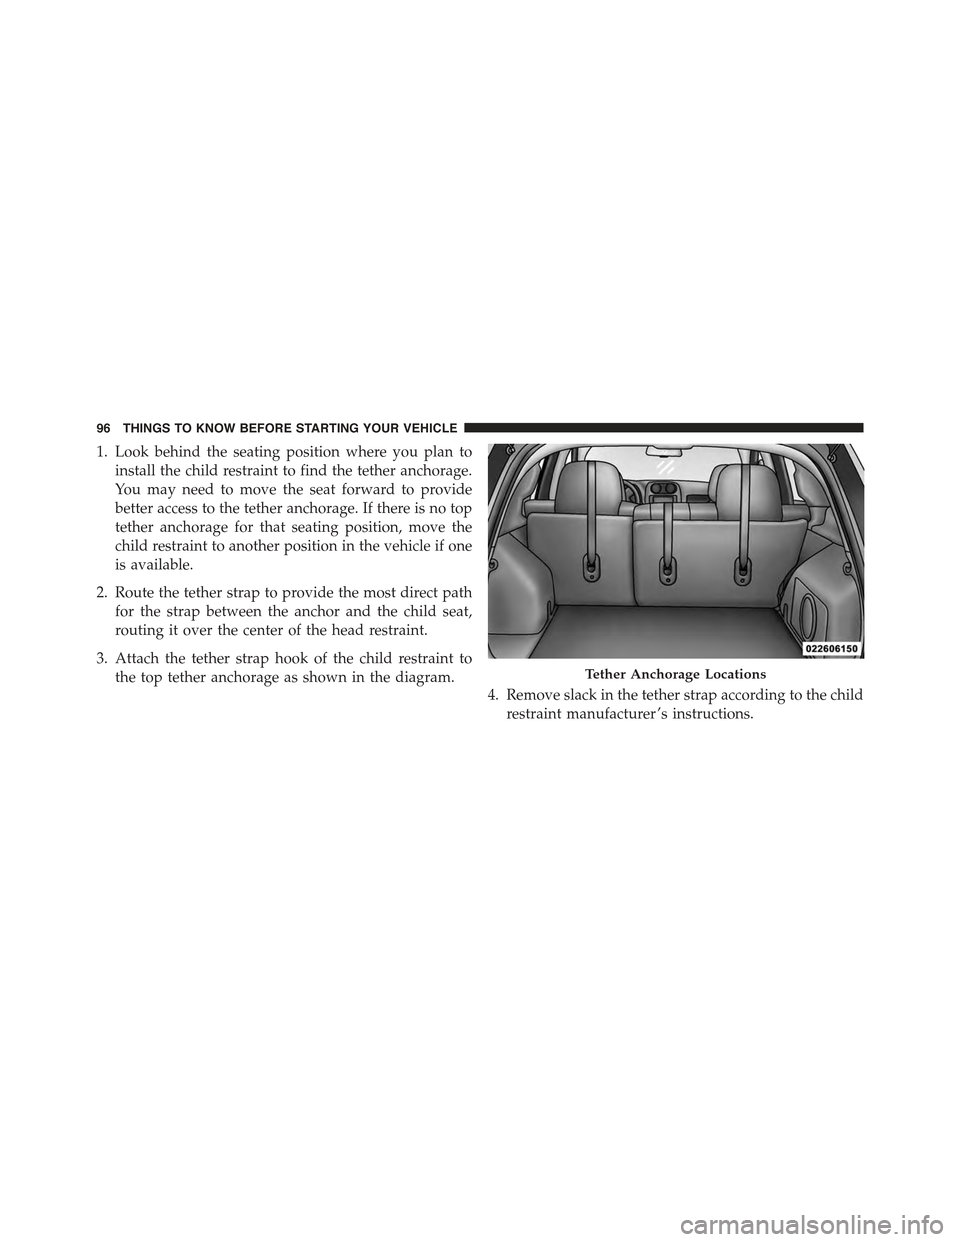 JEEP COMPASS 2015 1.G Owners Manual 1. Look behind the seating position where you plan to
install the child restraint to find the tether anchorage.
You may need to move the seat forward to provide
better access to the tether anchorage. 